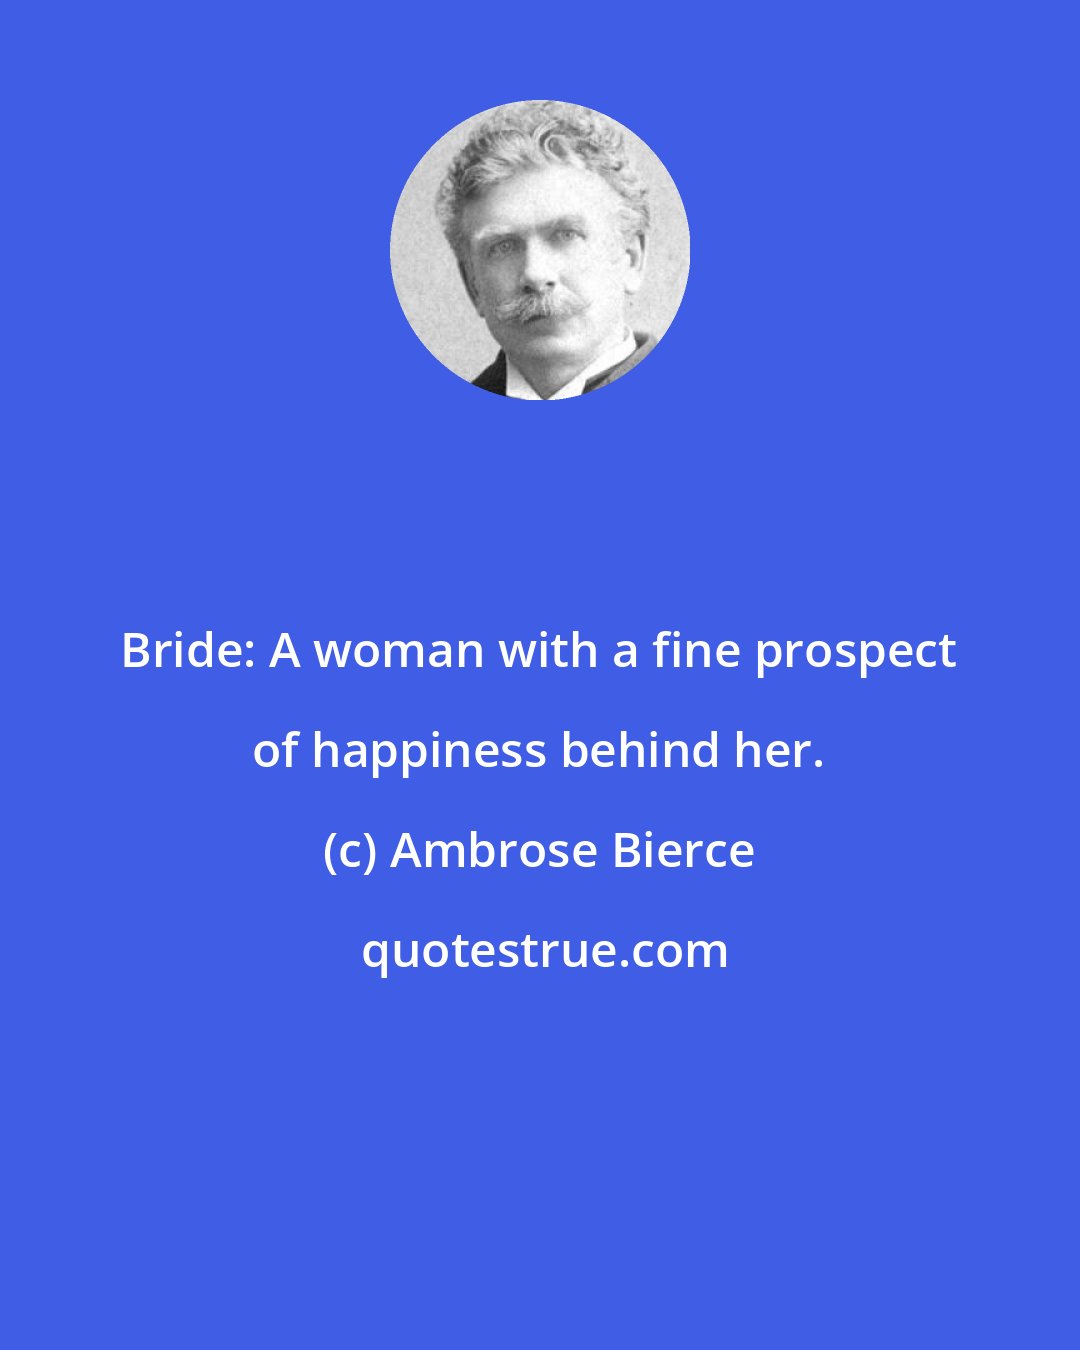 Ambrose Bierce: Bride: A woman with a fine prospect of happiness behind her.